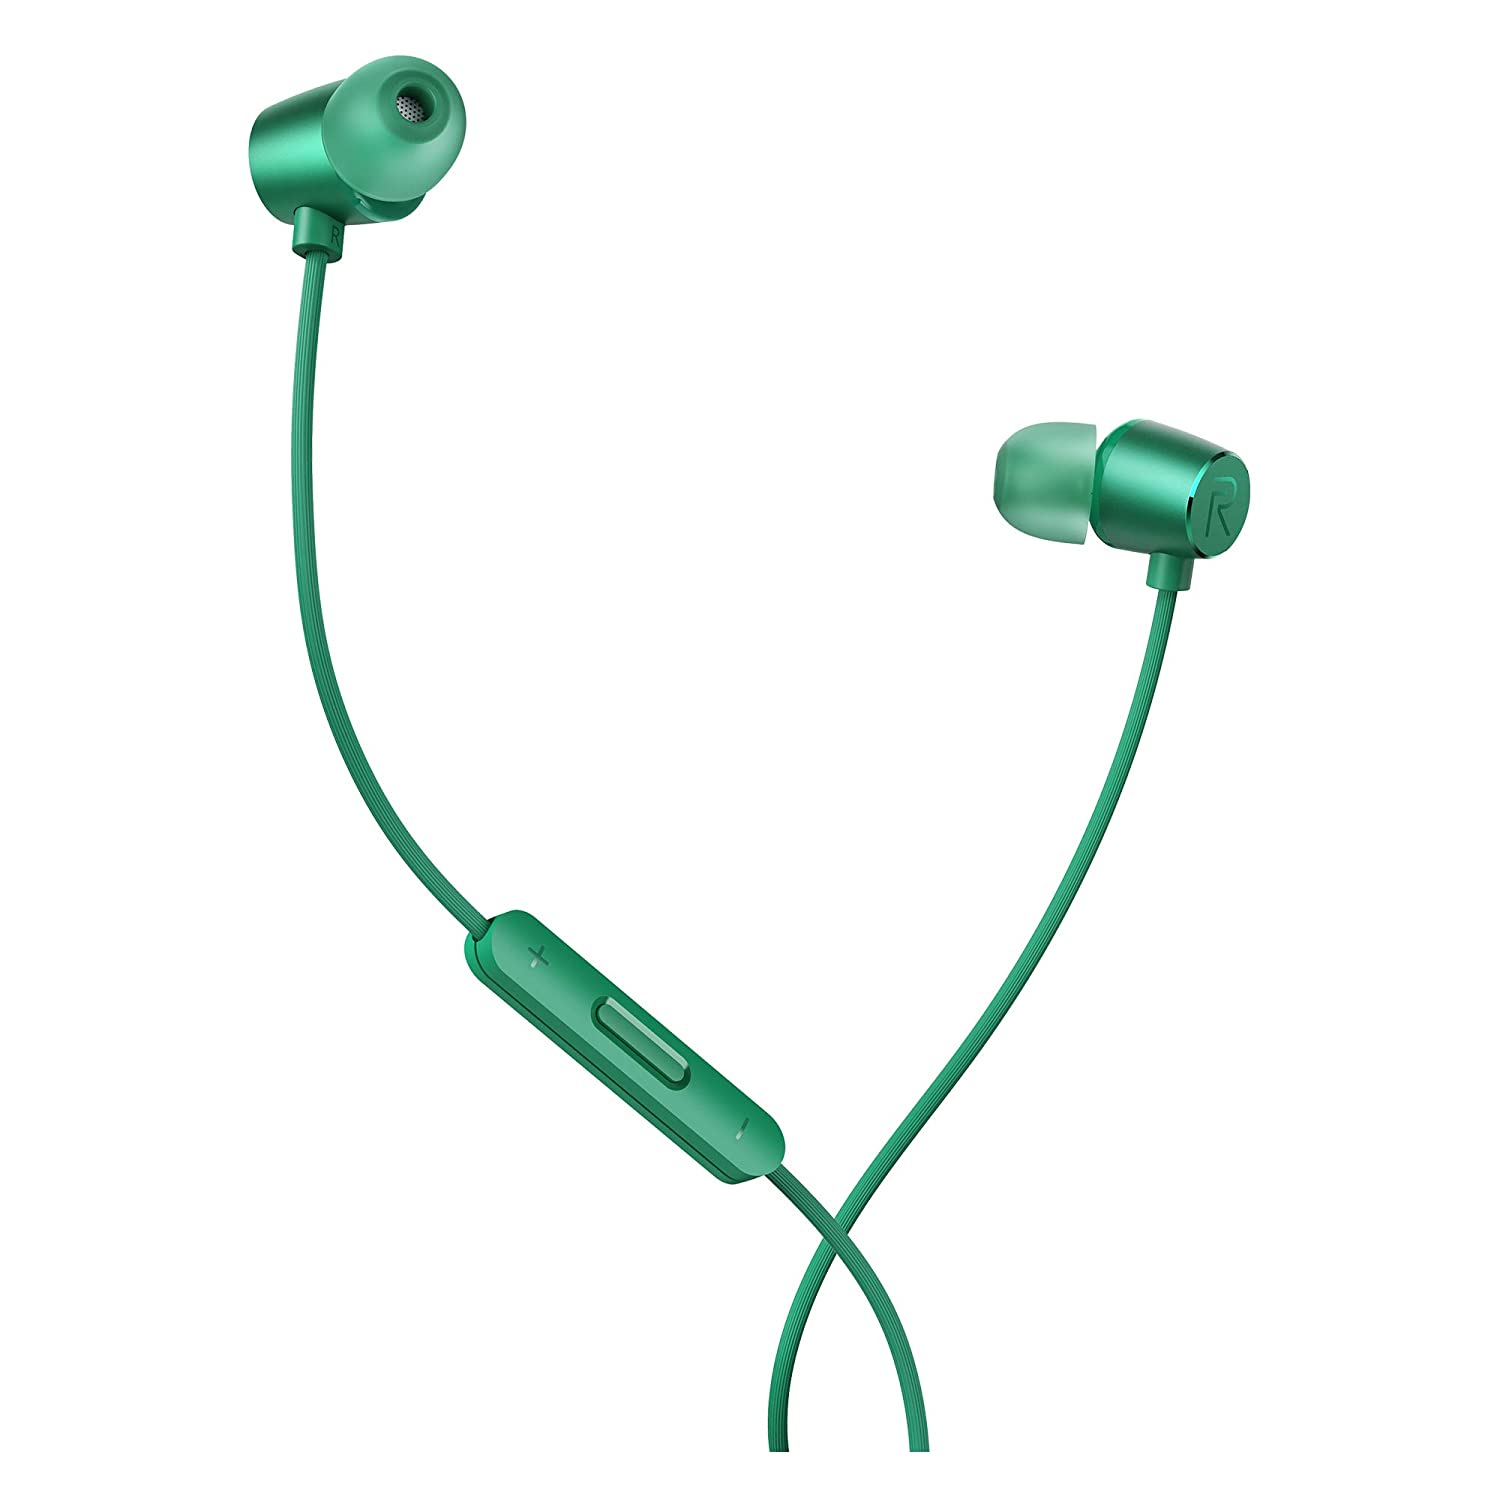 Open Box, Unused Realme Buds 2 Wired in Ear Earphones with Mic Green Pack of 5